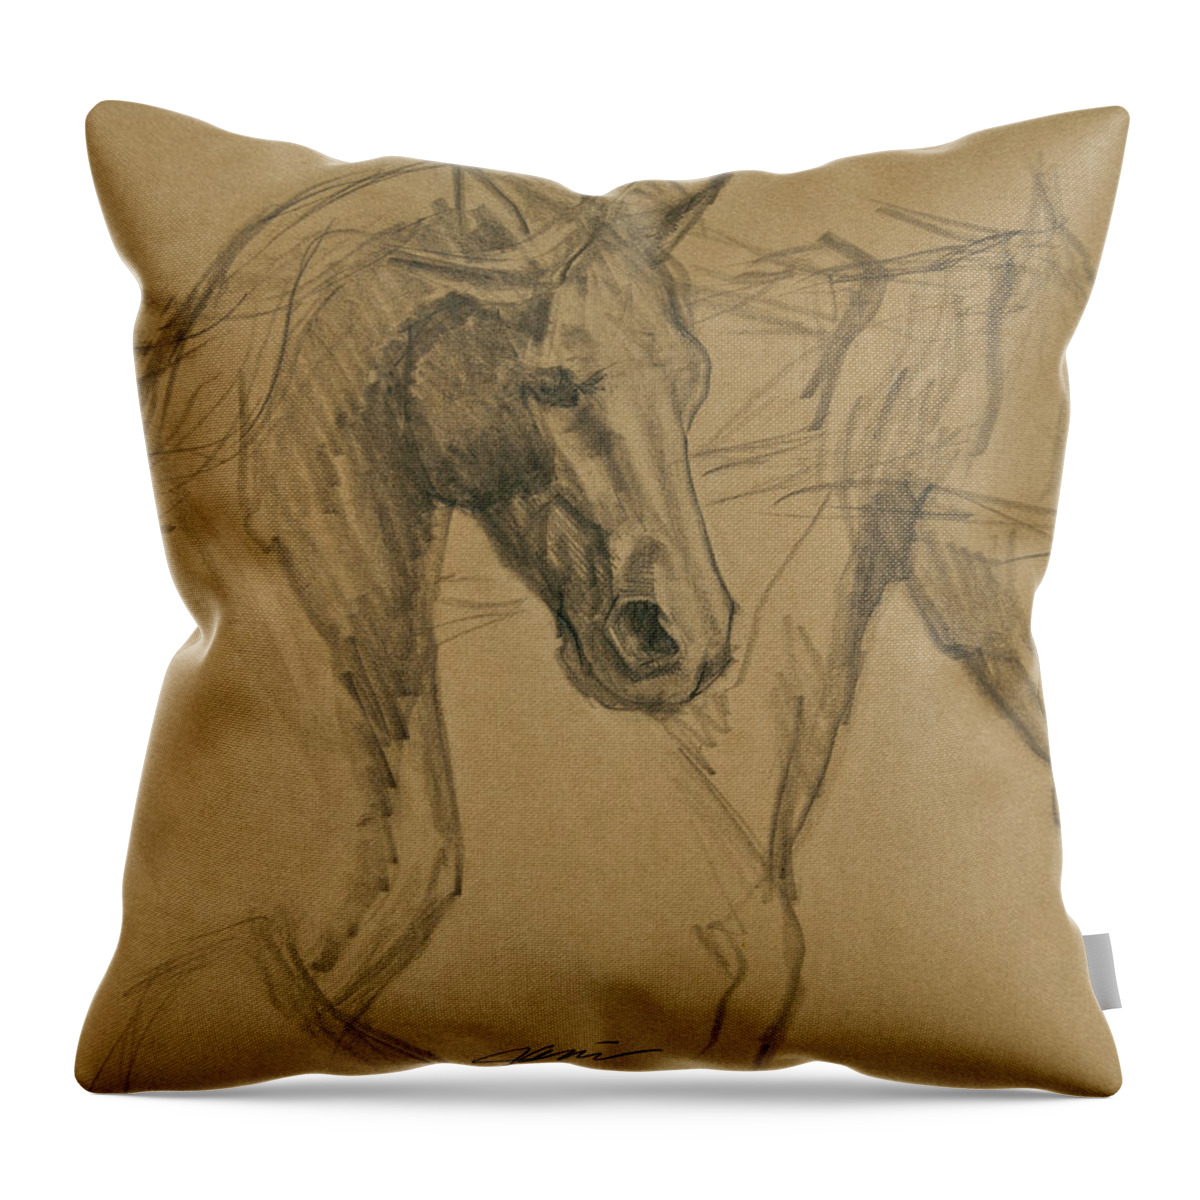 Horse Art Throw Pillow featuring the drawing Peace And Justice Sketch by Jani Freimann